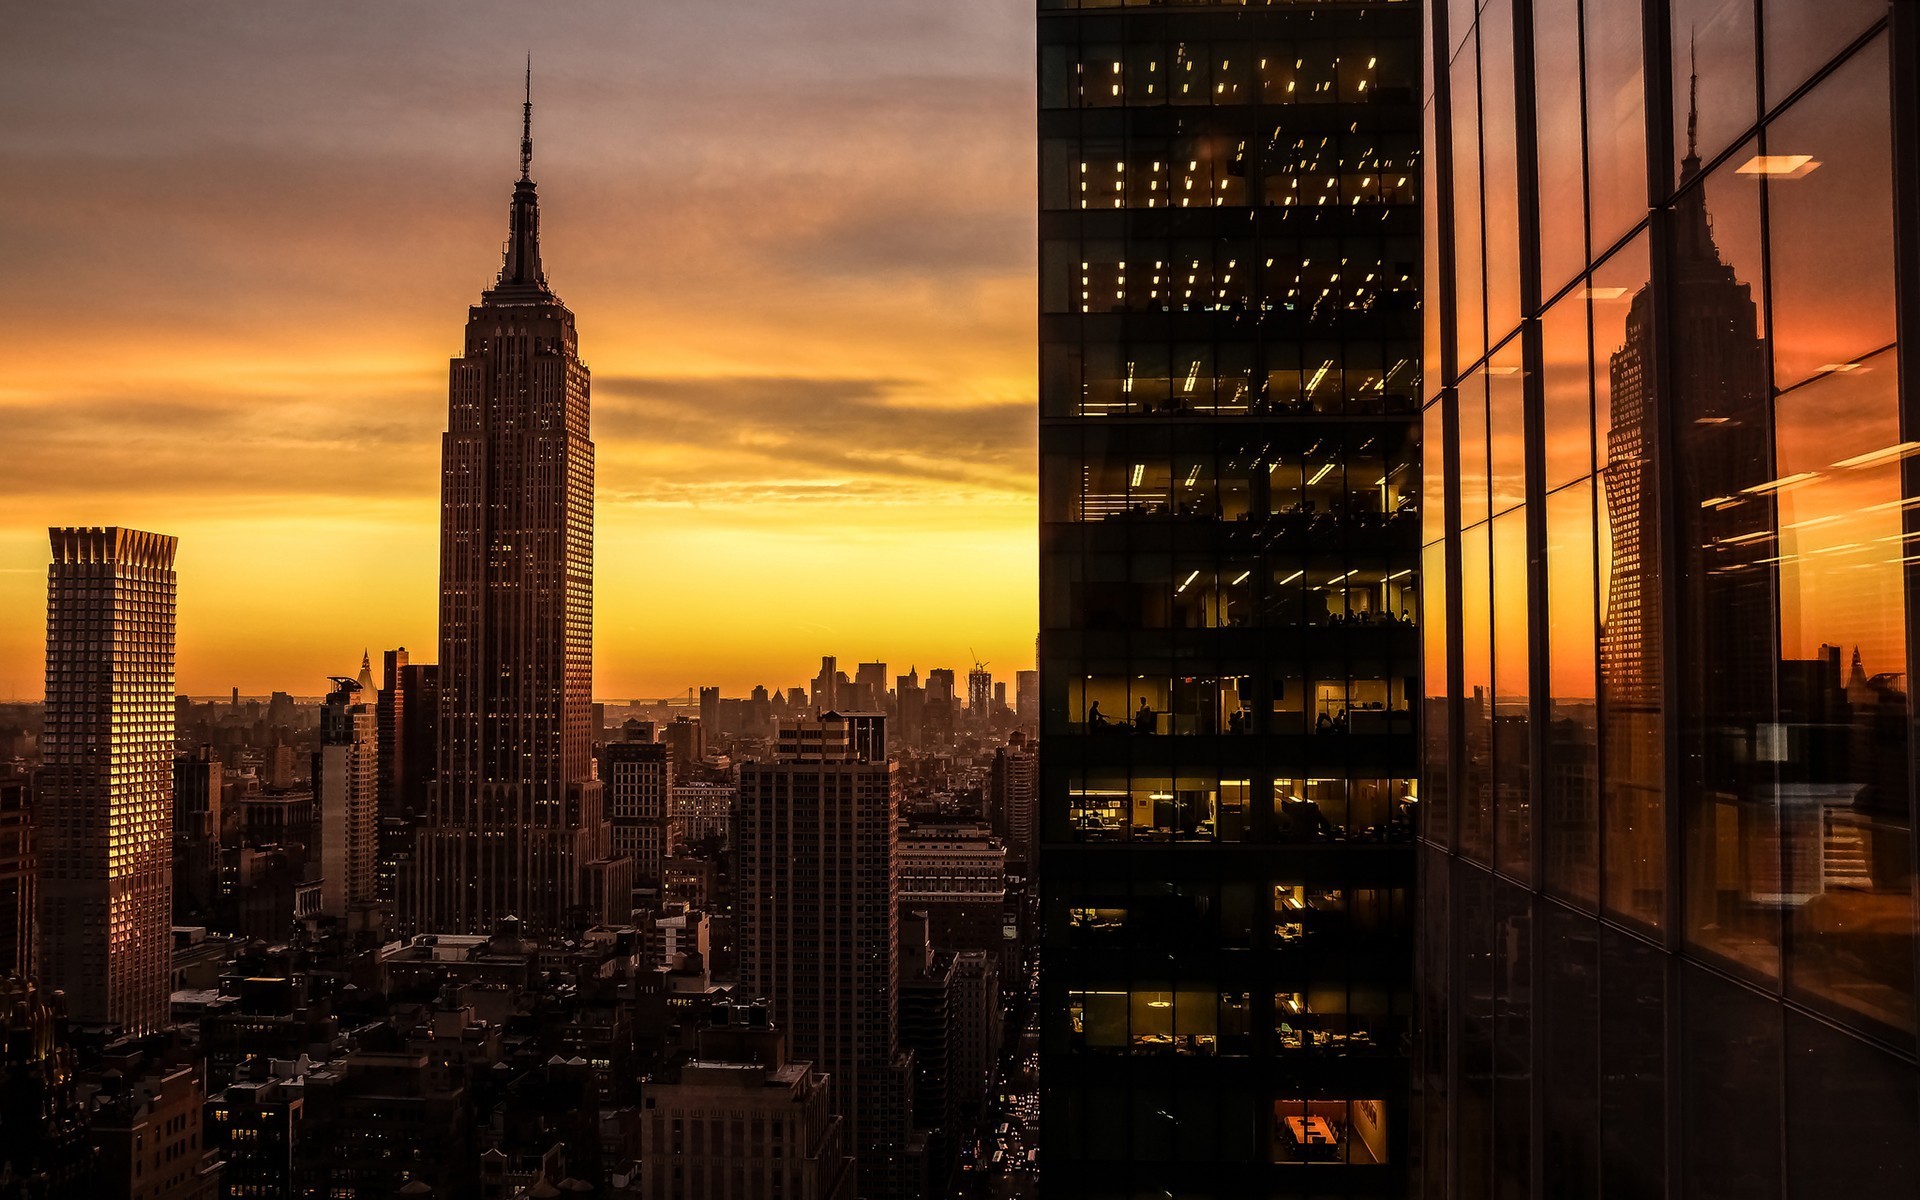 sunset, man made, new york, cityscape, empire state building, reflection, skyscraper, window, cities